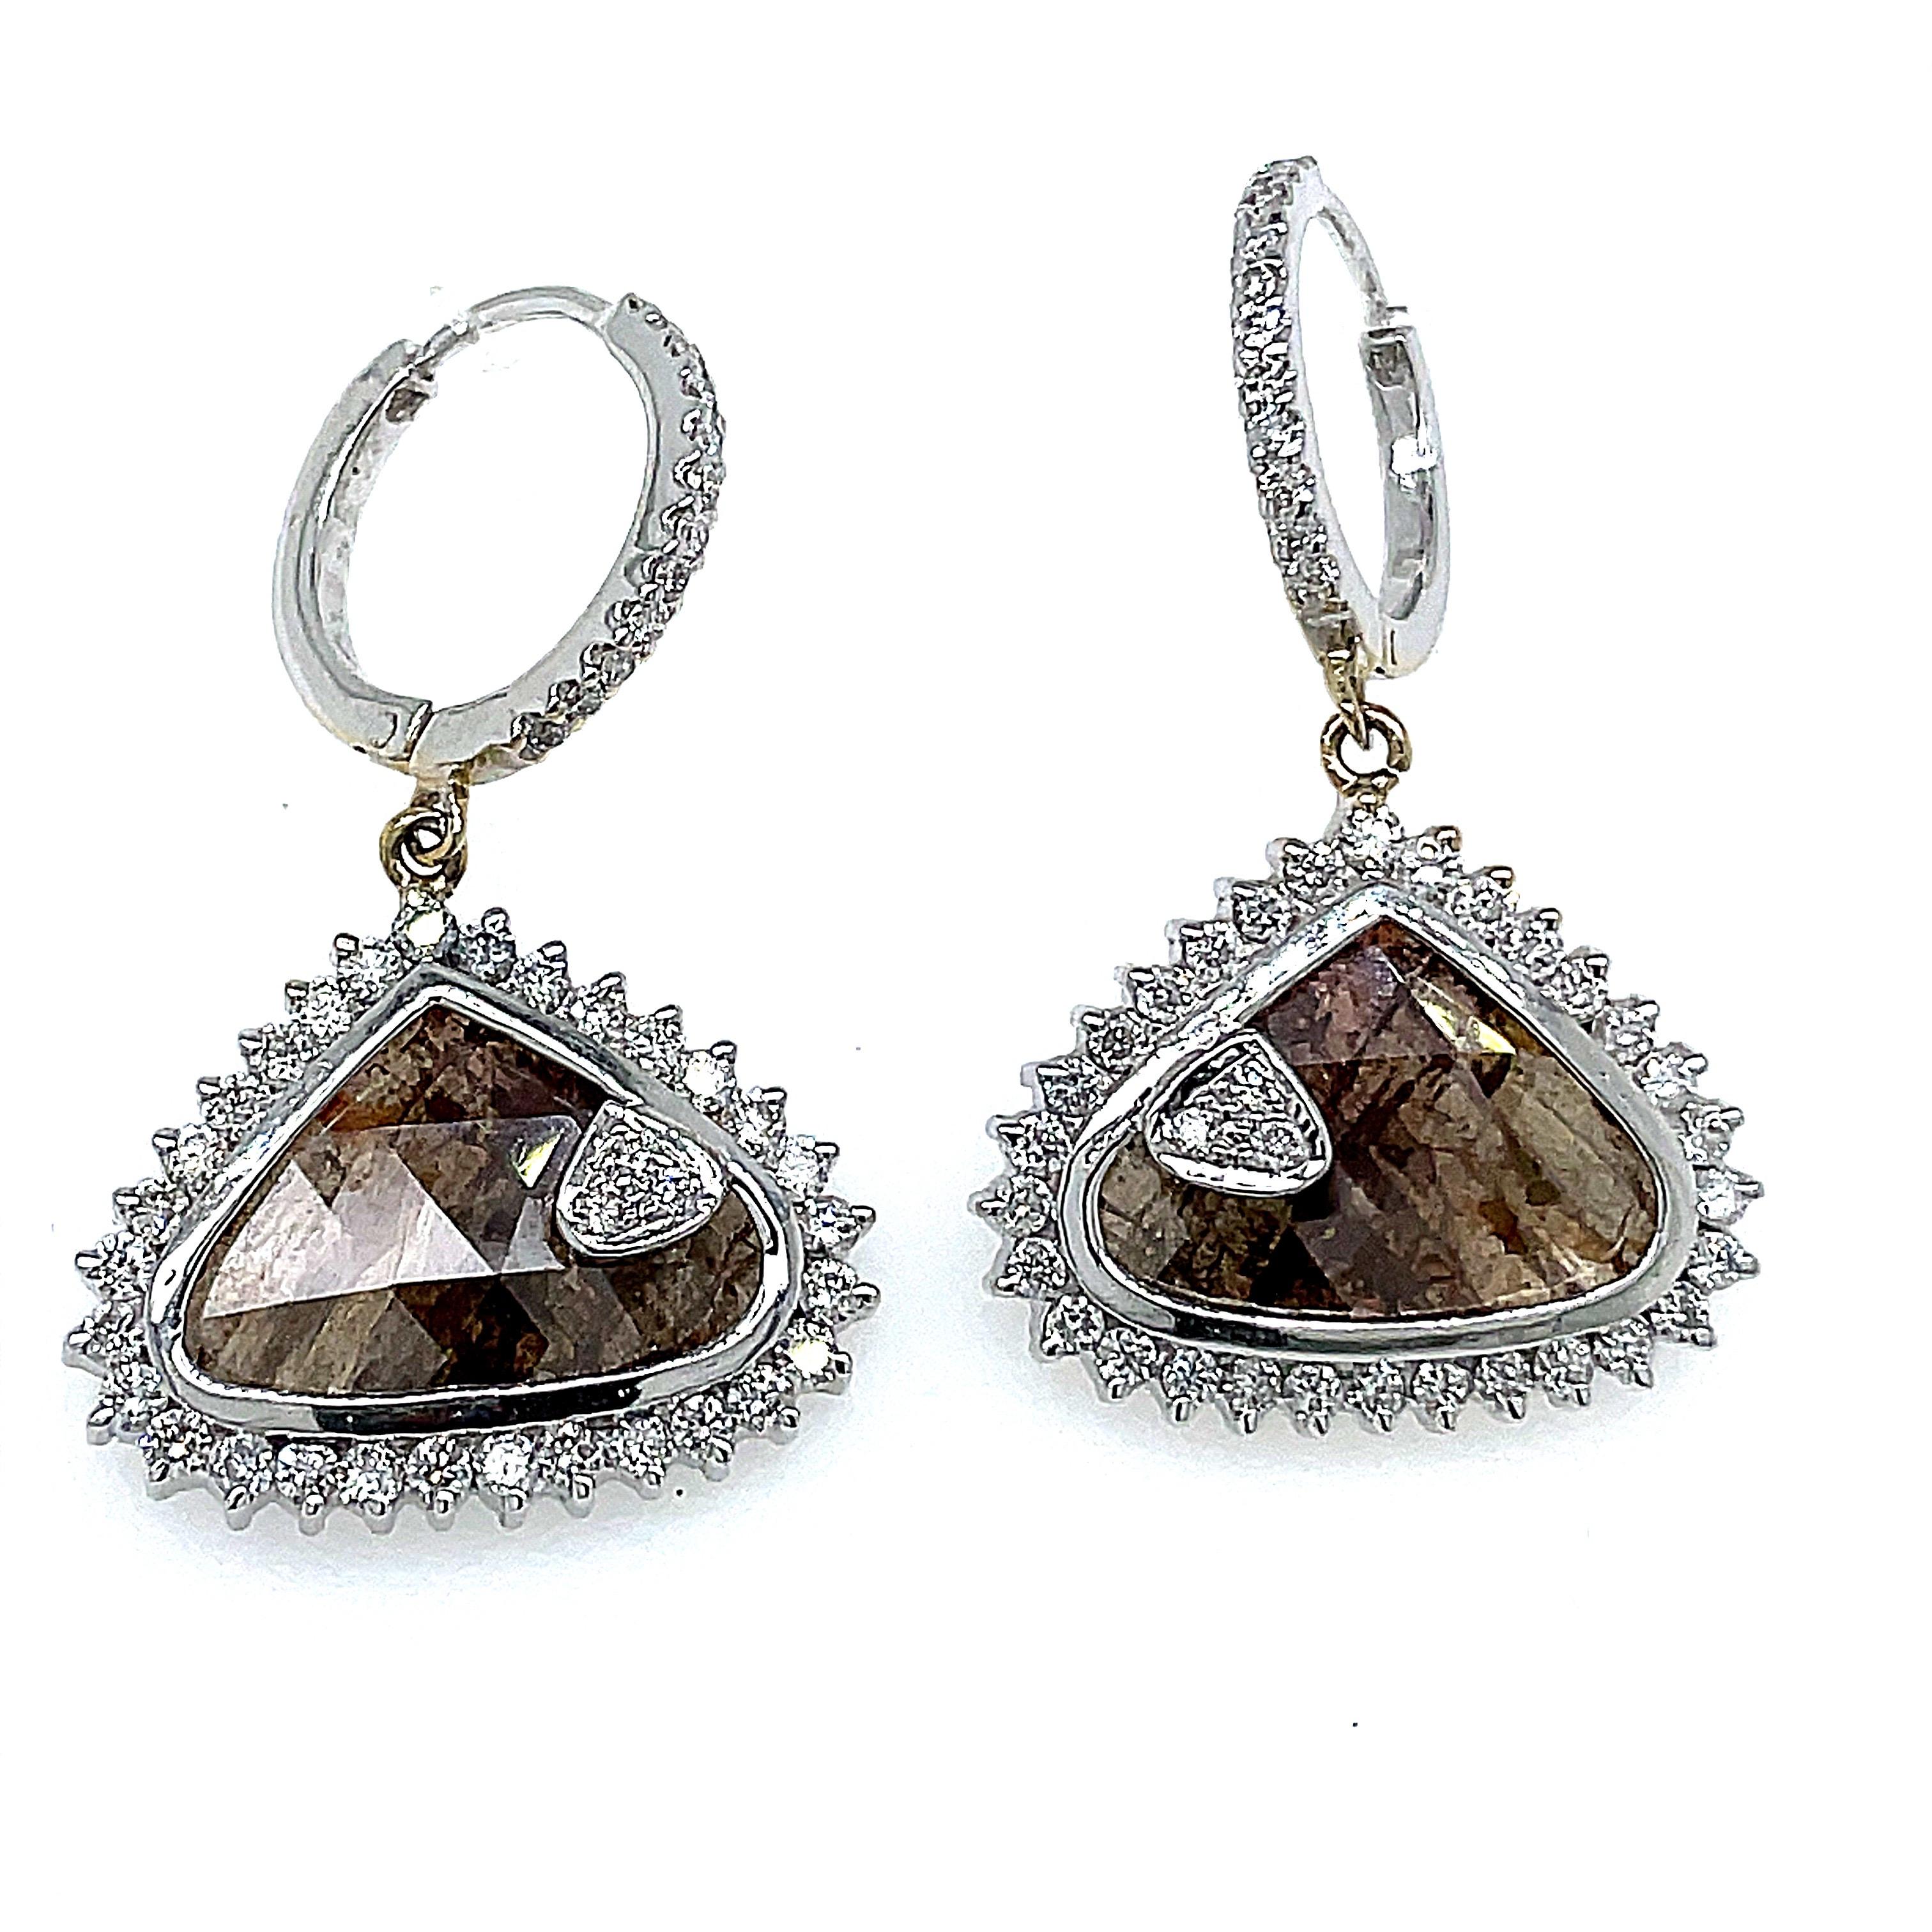 18k White Gold Fancy Brown Diamond Earrings

Crafted with meticulous attention to detail, the earrings showcase a pair of  lustrous 7.18cts brown diamonds with gold that weighs 8.16 grams, perfectly set in a high-quality 18k white gold metal frame.